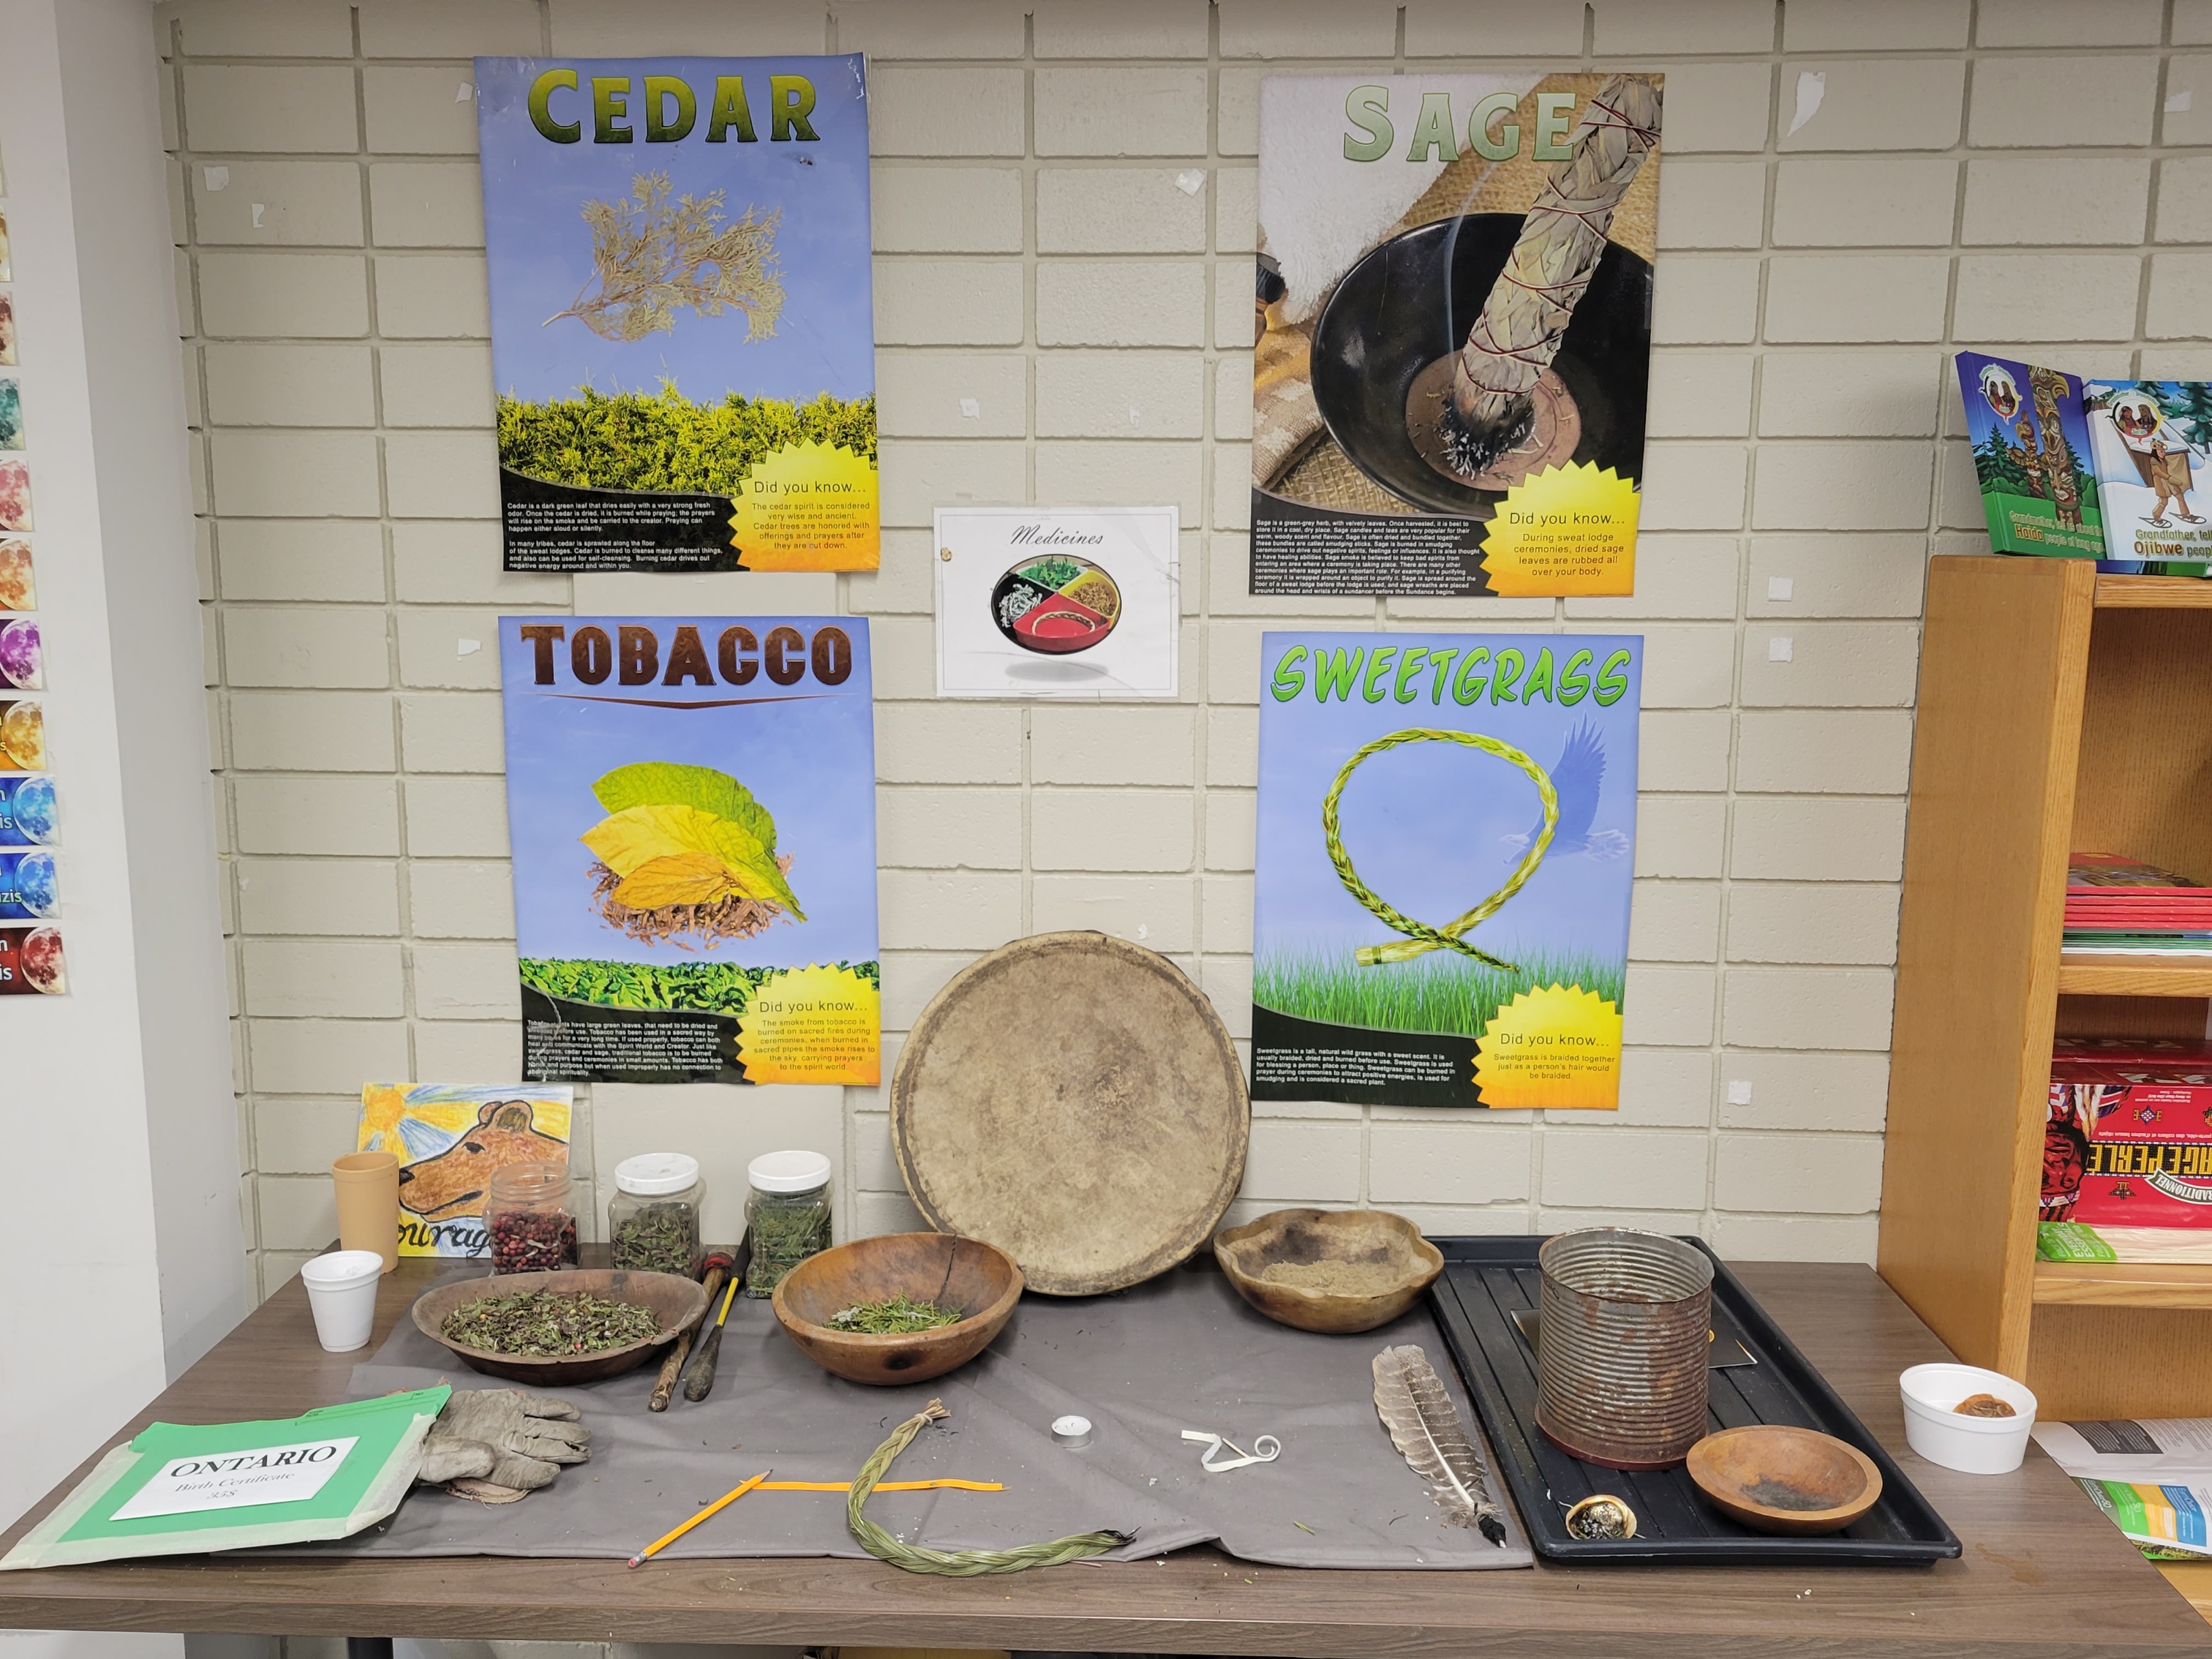 Photo of a table with medicines and ceremonial items used by the Elders at Stony Mountain Institution.